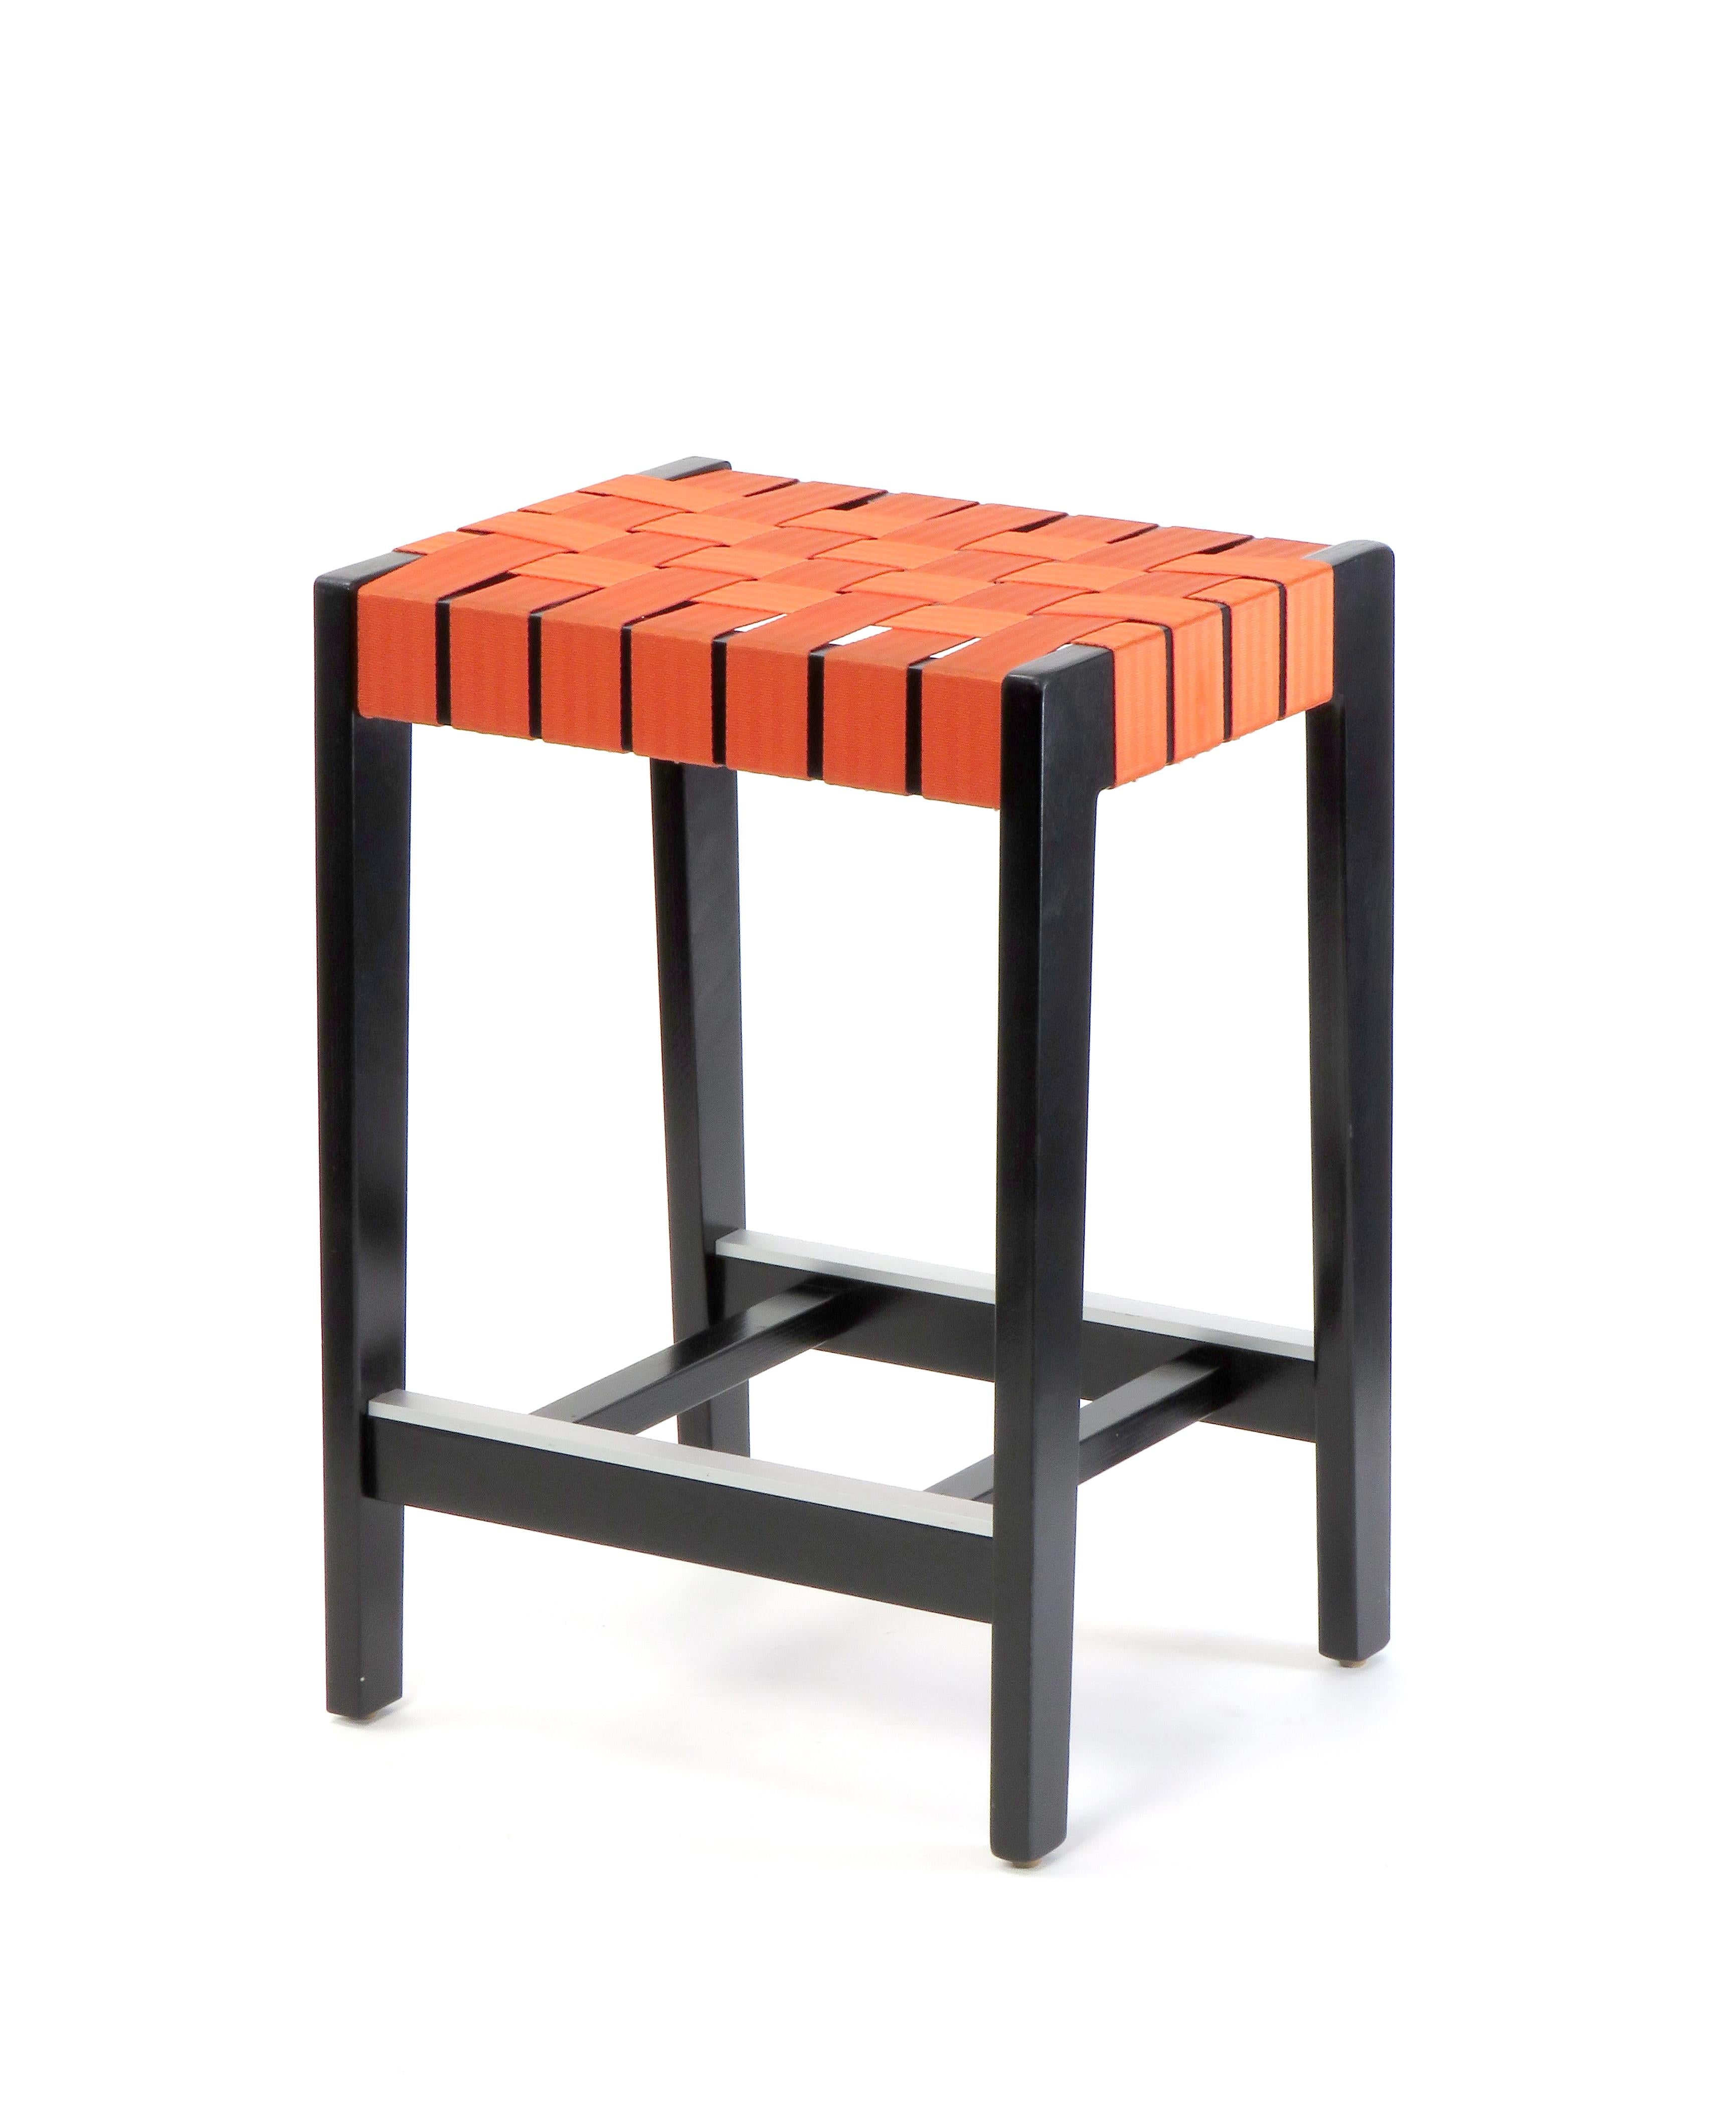 Maple Black Finish Bar Stool with Orange Woven Seat Made in USA by Peter Danko (Moderne) im Angebot